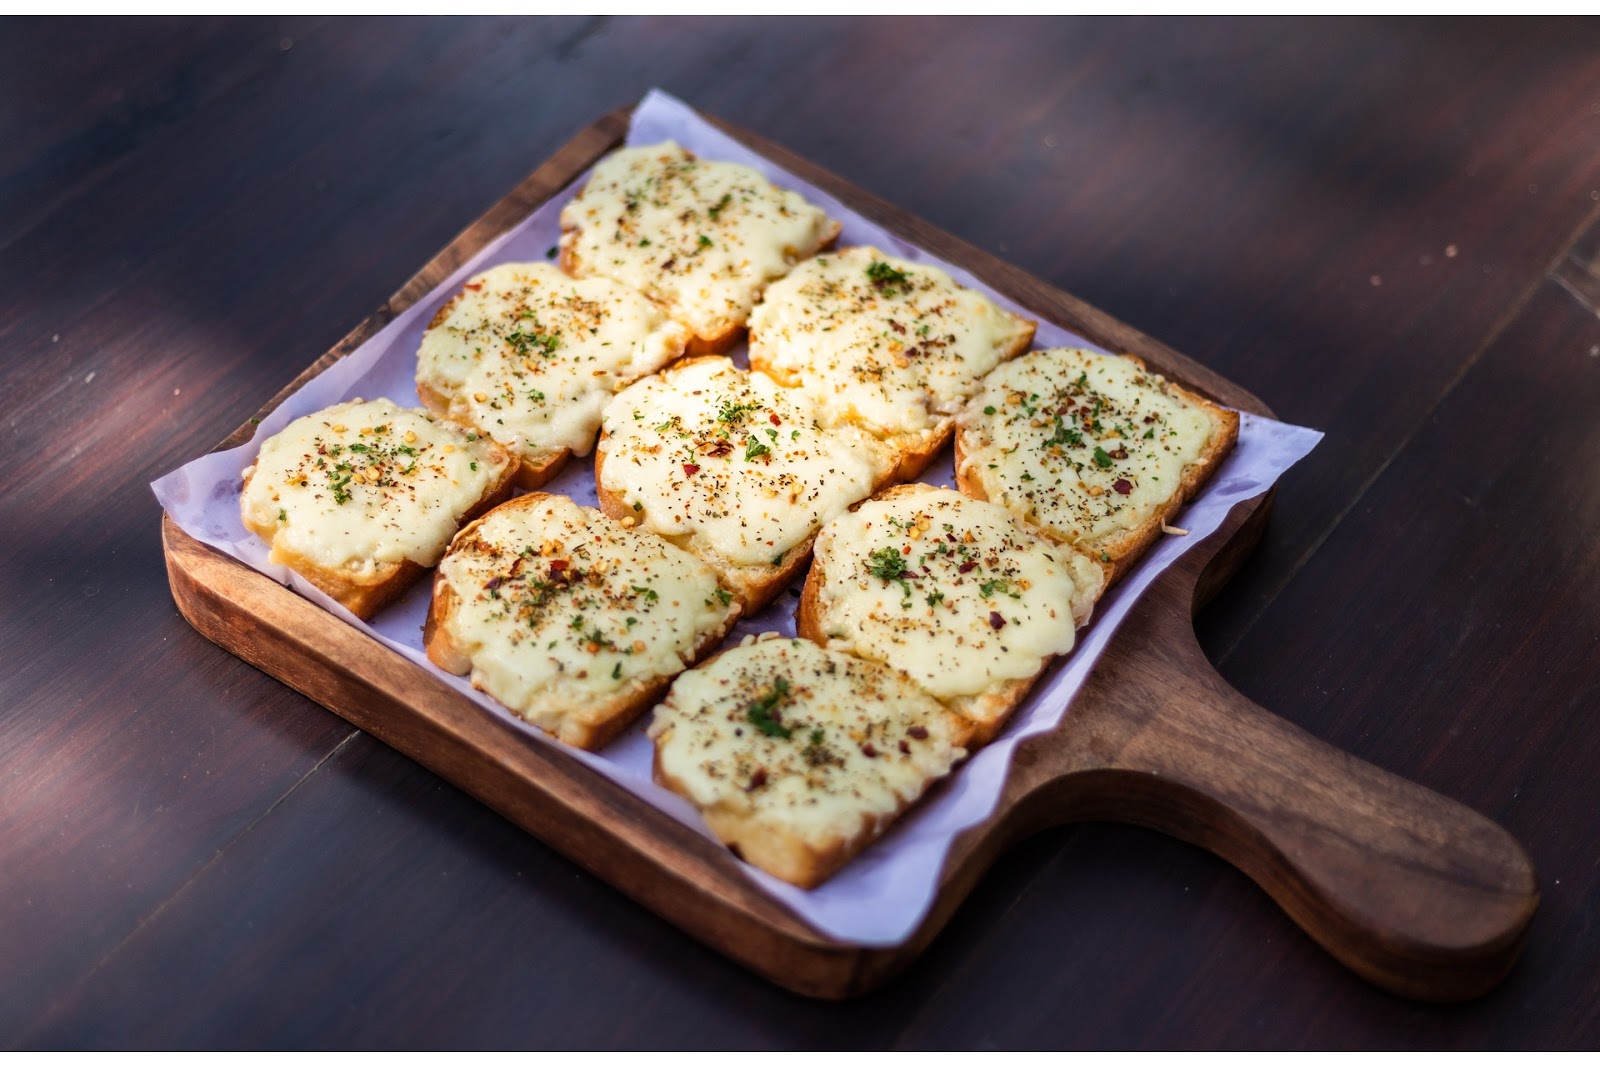 Garlic cheese toast on a wooden tray - breakfast ideas without eggs